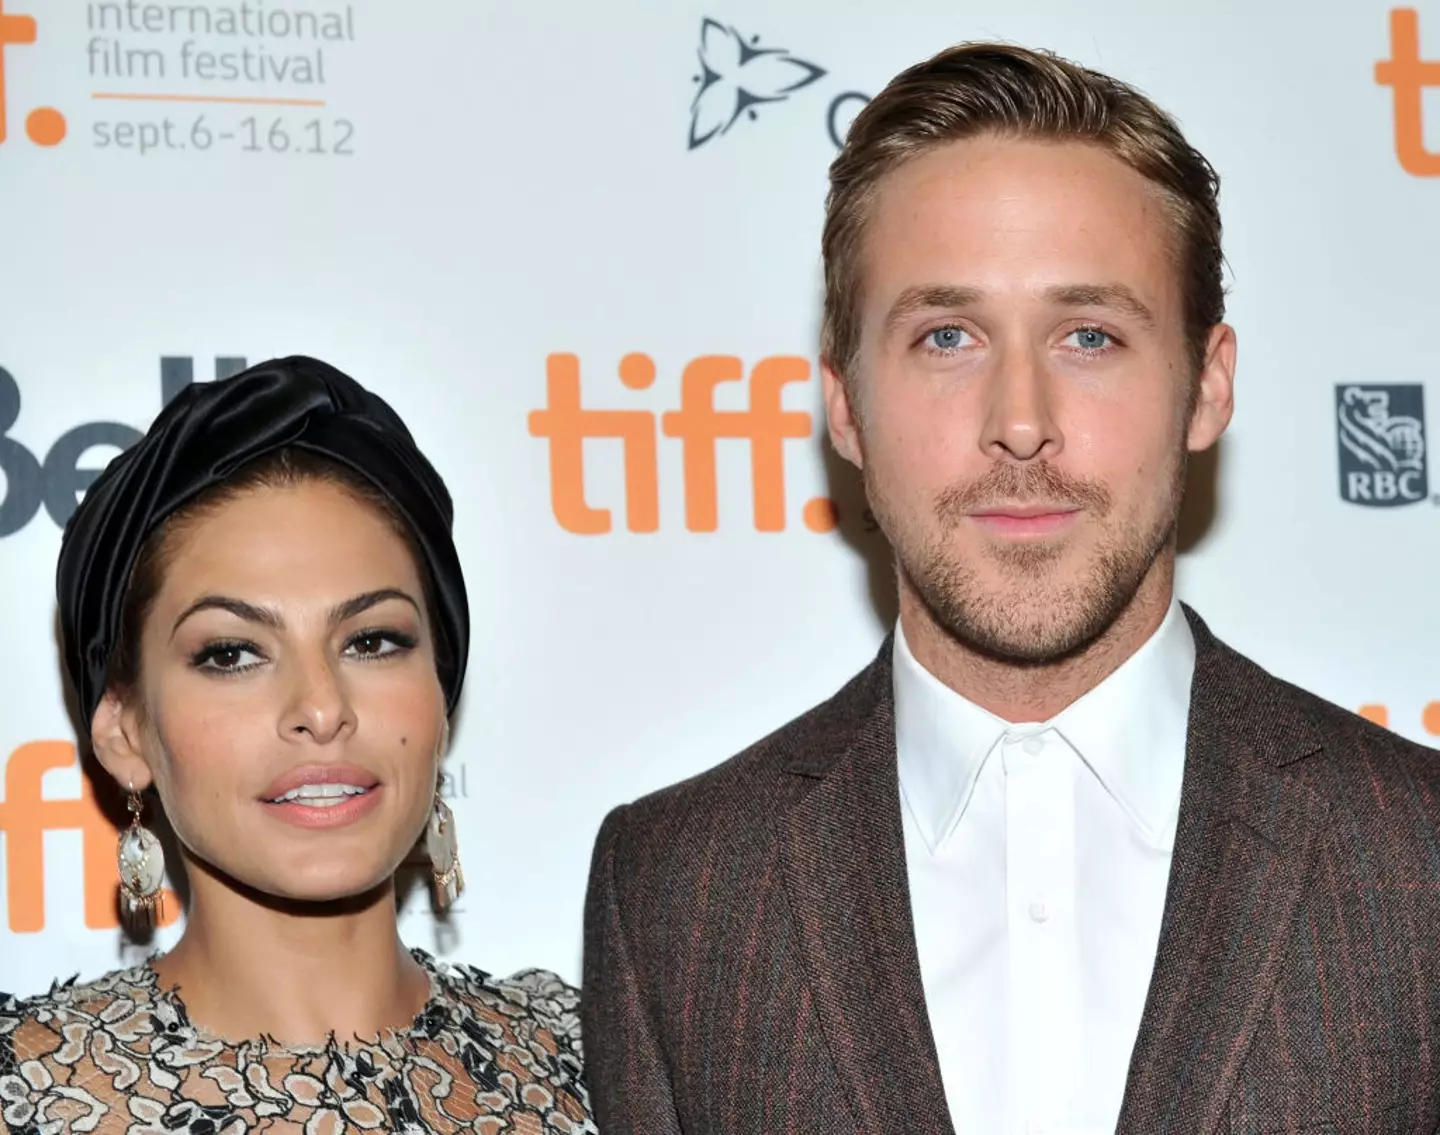 The pair teamed up for The Place Beyond The Pines in 2012. (Sonia Recchia/Getty Images)